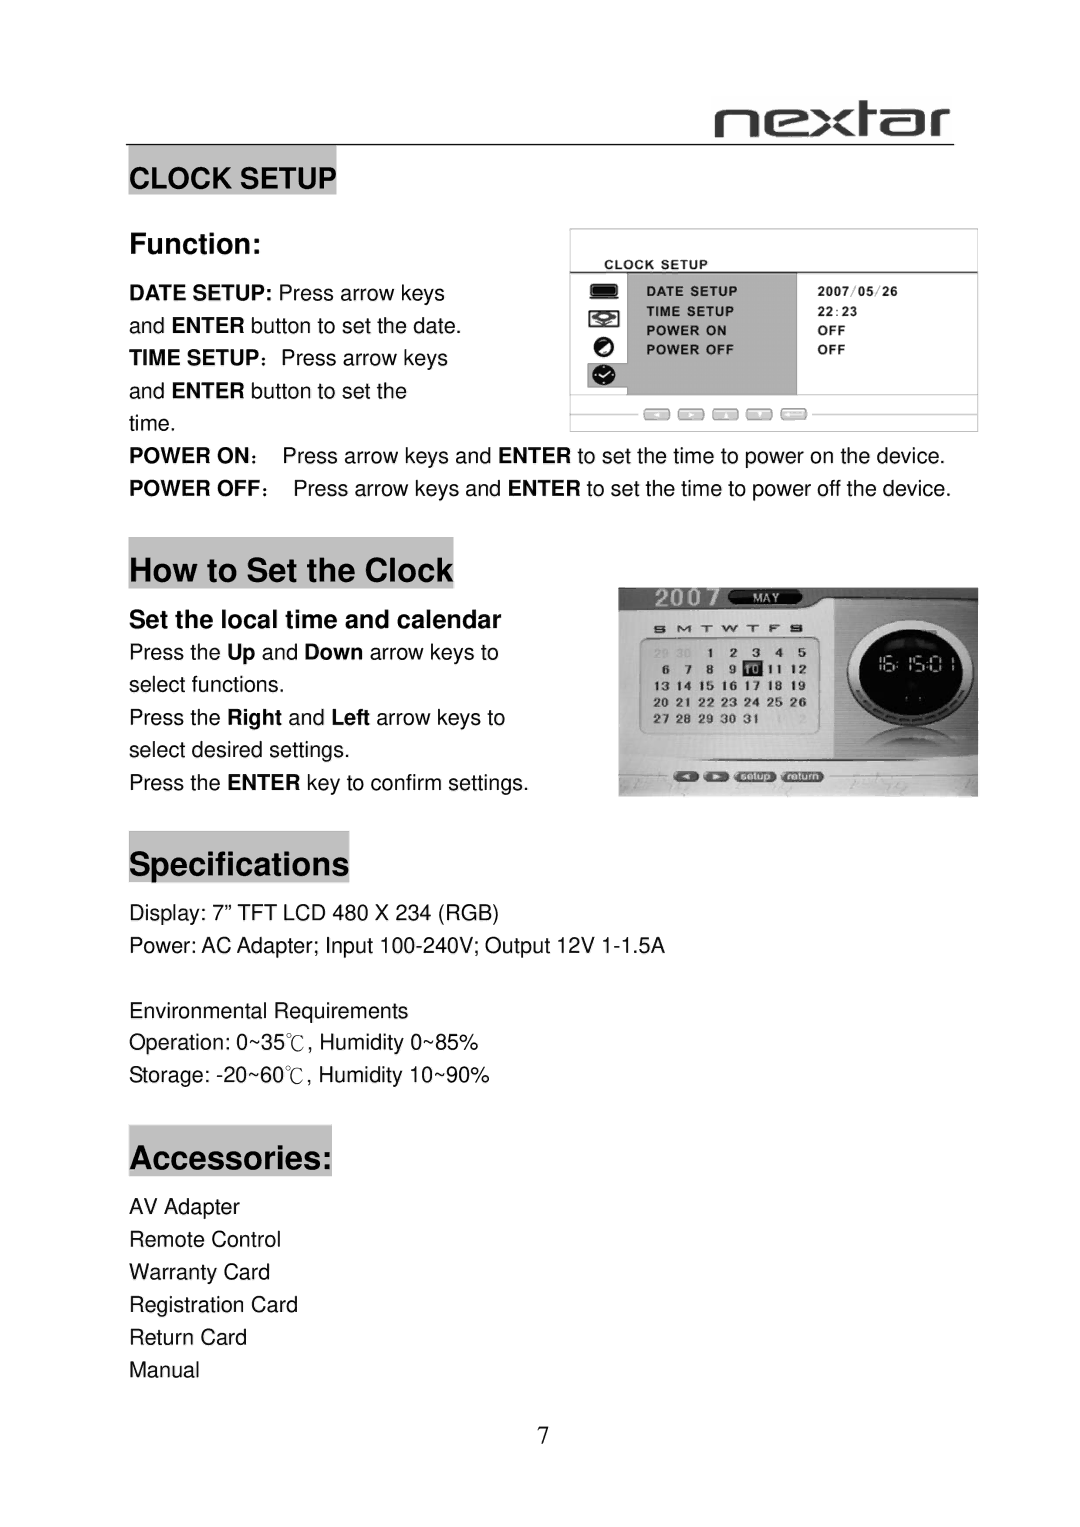 Nextar N7-110 user manual How to Set the Clock, Specifications, Accessories, Clock Setup, Function 